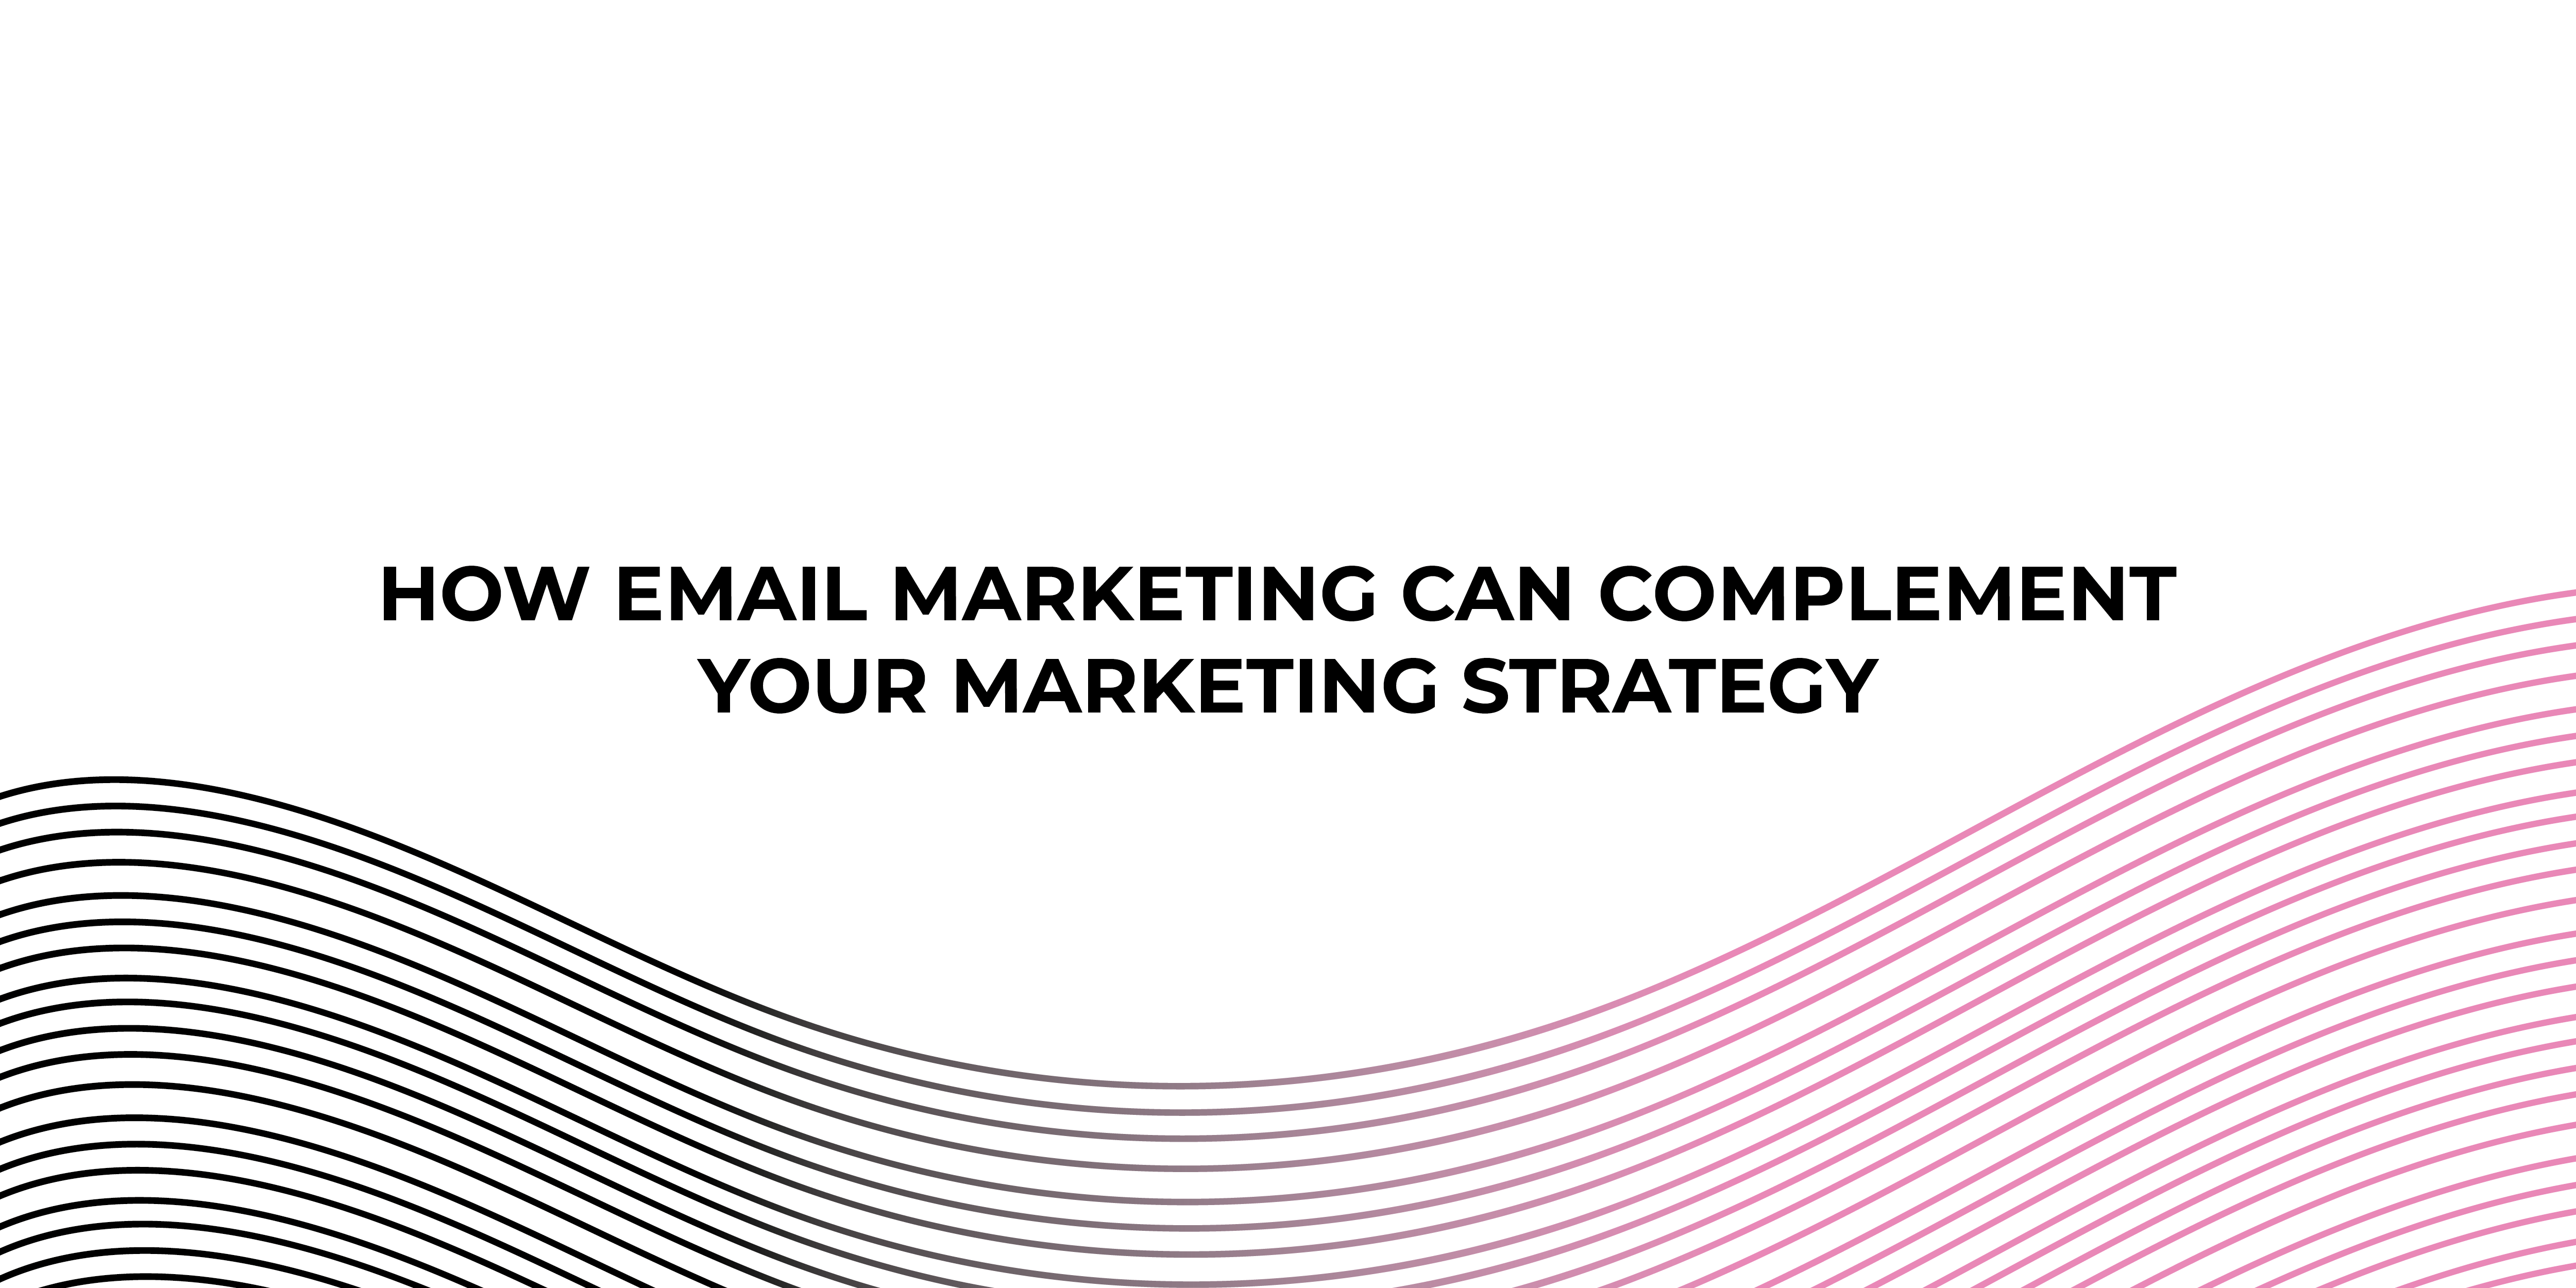 How Email Marketing Can Complement Your Marketing Strategy